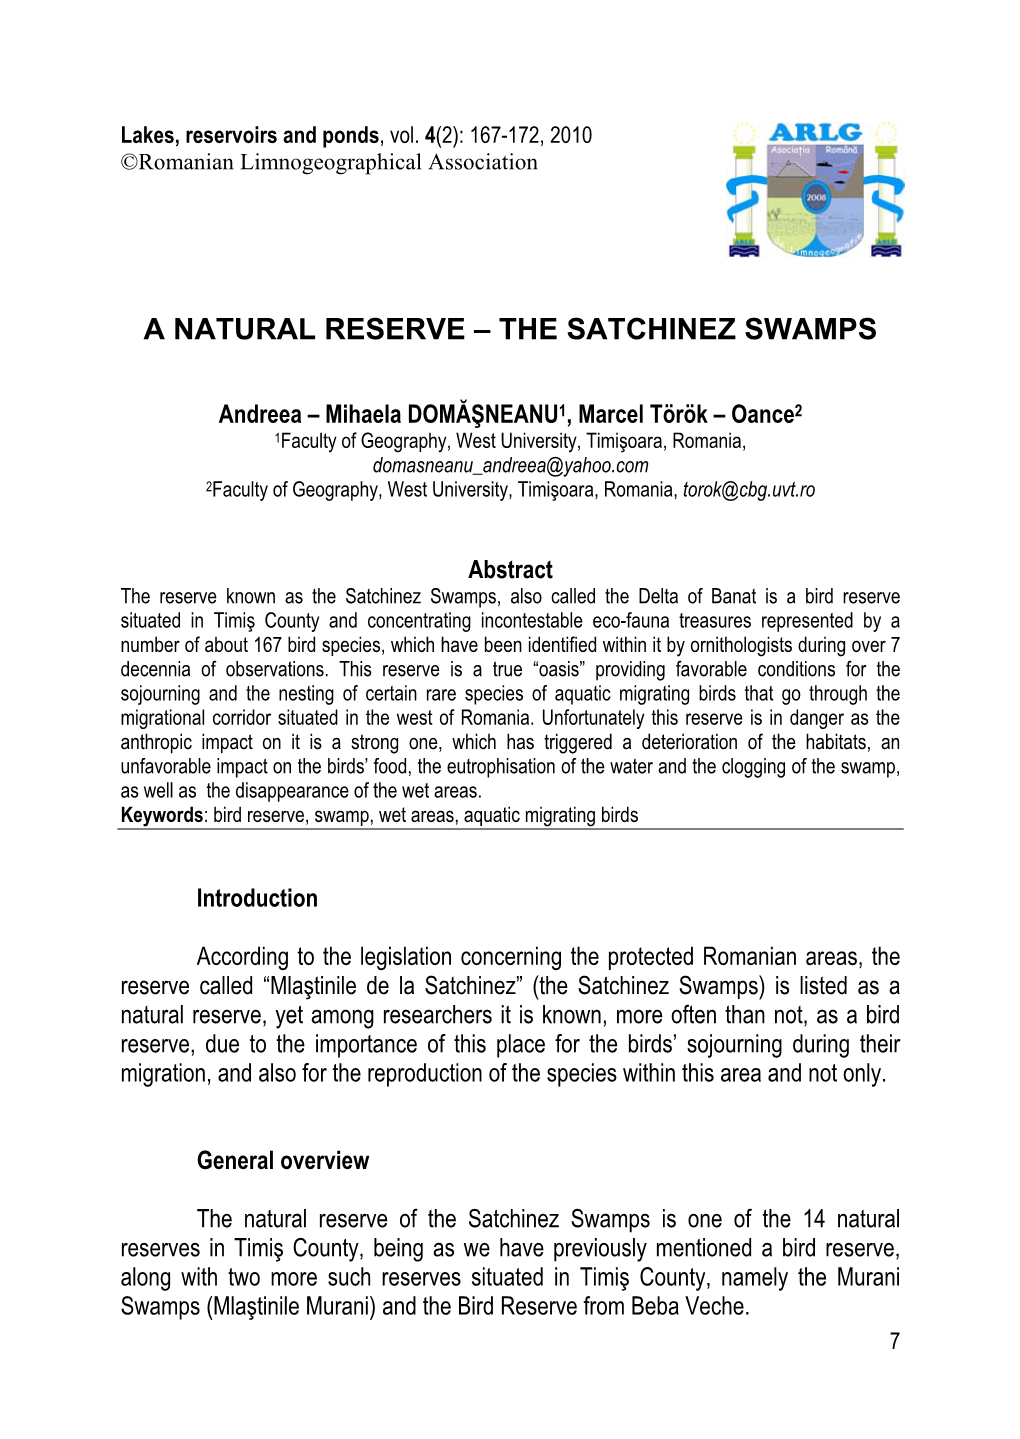 A Natural Reserve – the Satchinez Swamps